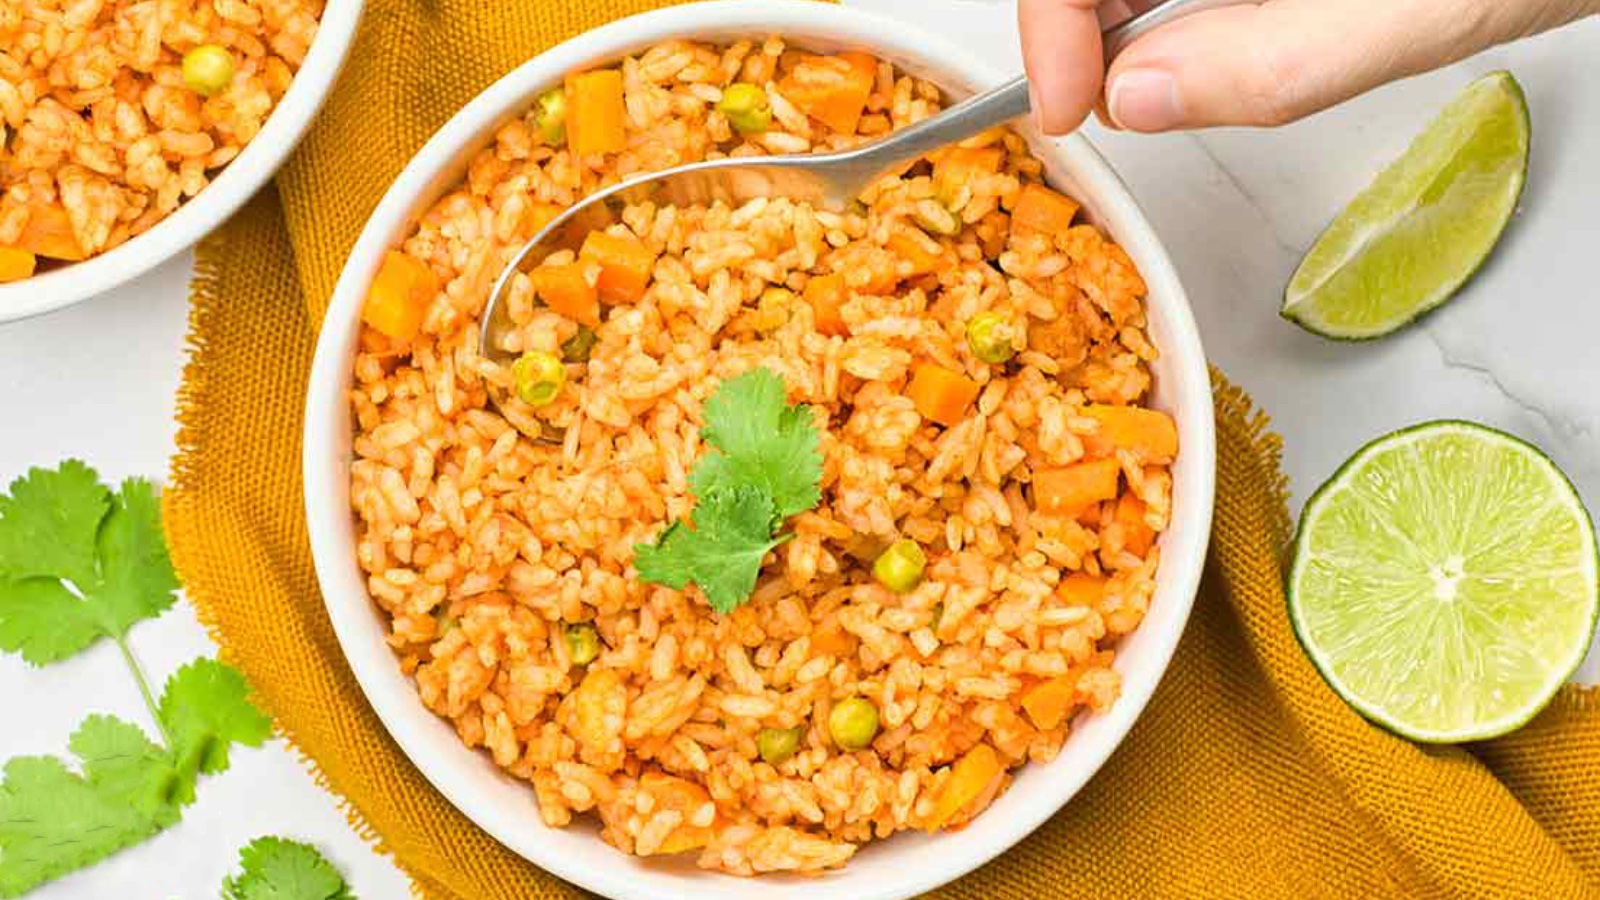 10 Nutritious Meals For Your Extra Bag Of Brown Rice